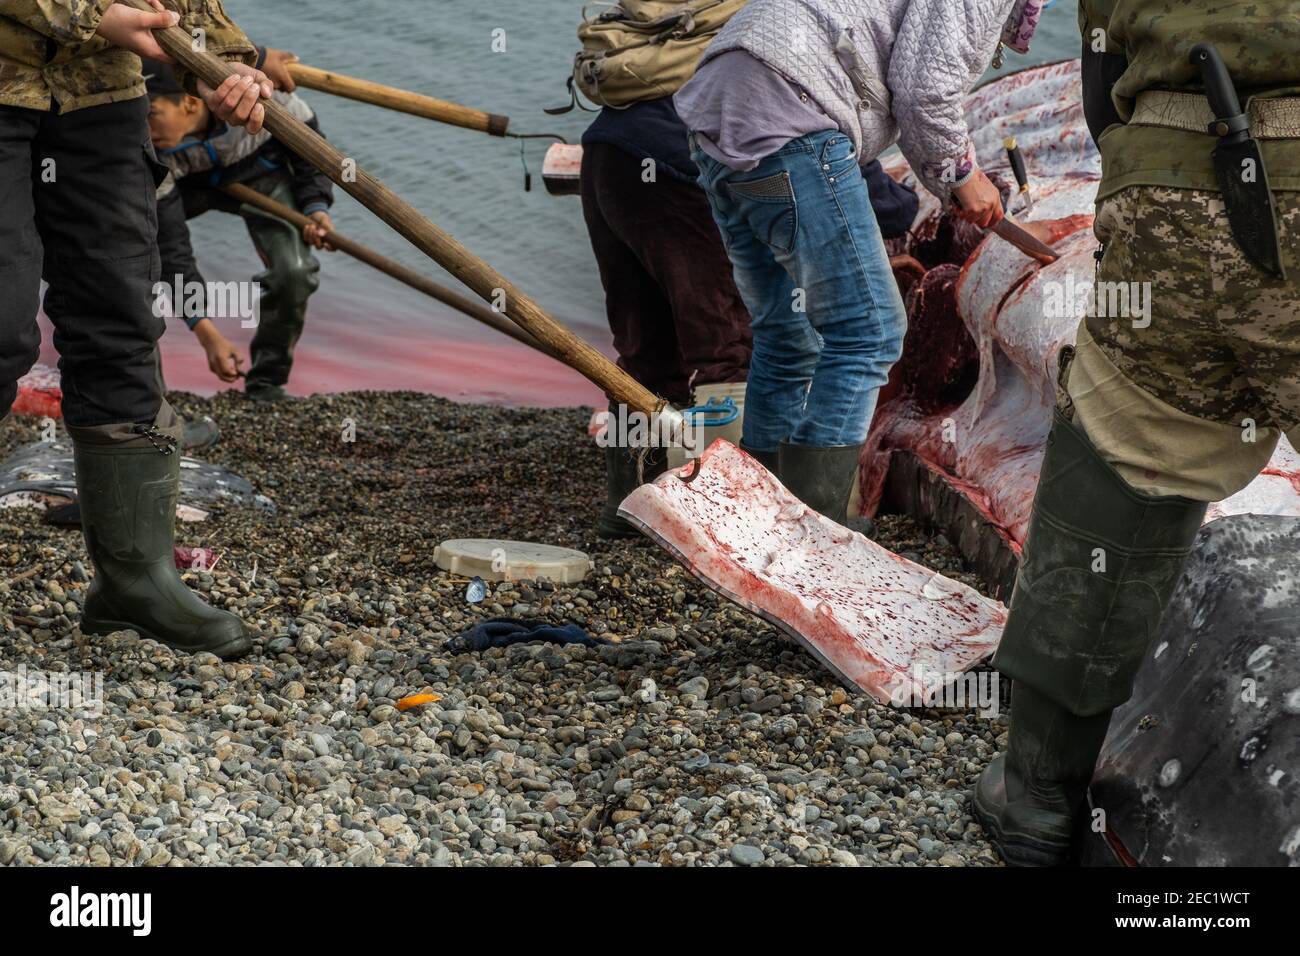 Lavrentiia, Chukotski region, Russia - August 5, 2020: The natives of Chukotka have caught a whale and are now cutting it into pieces. Stock Photo